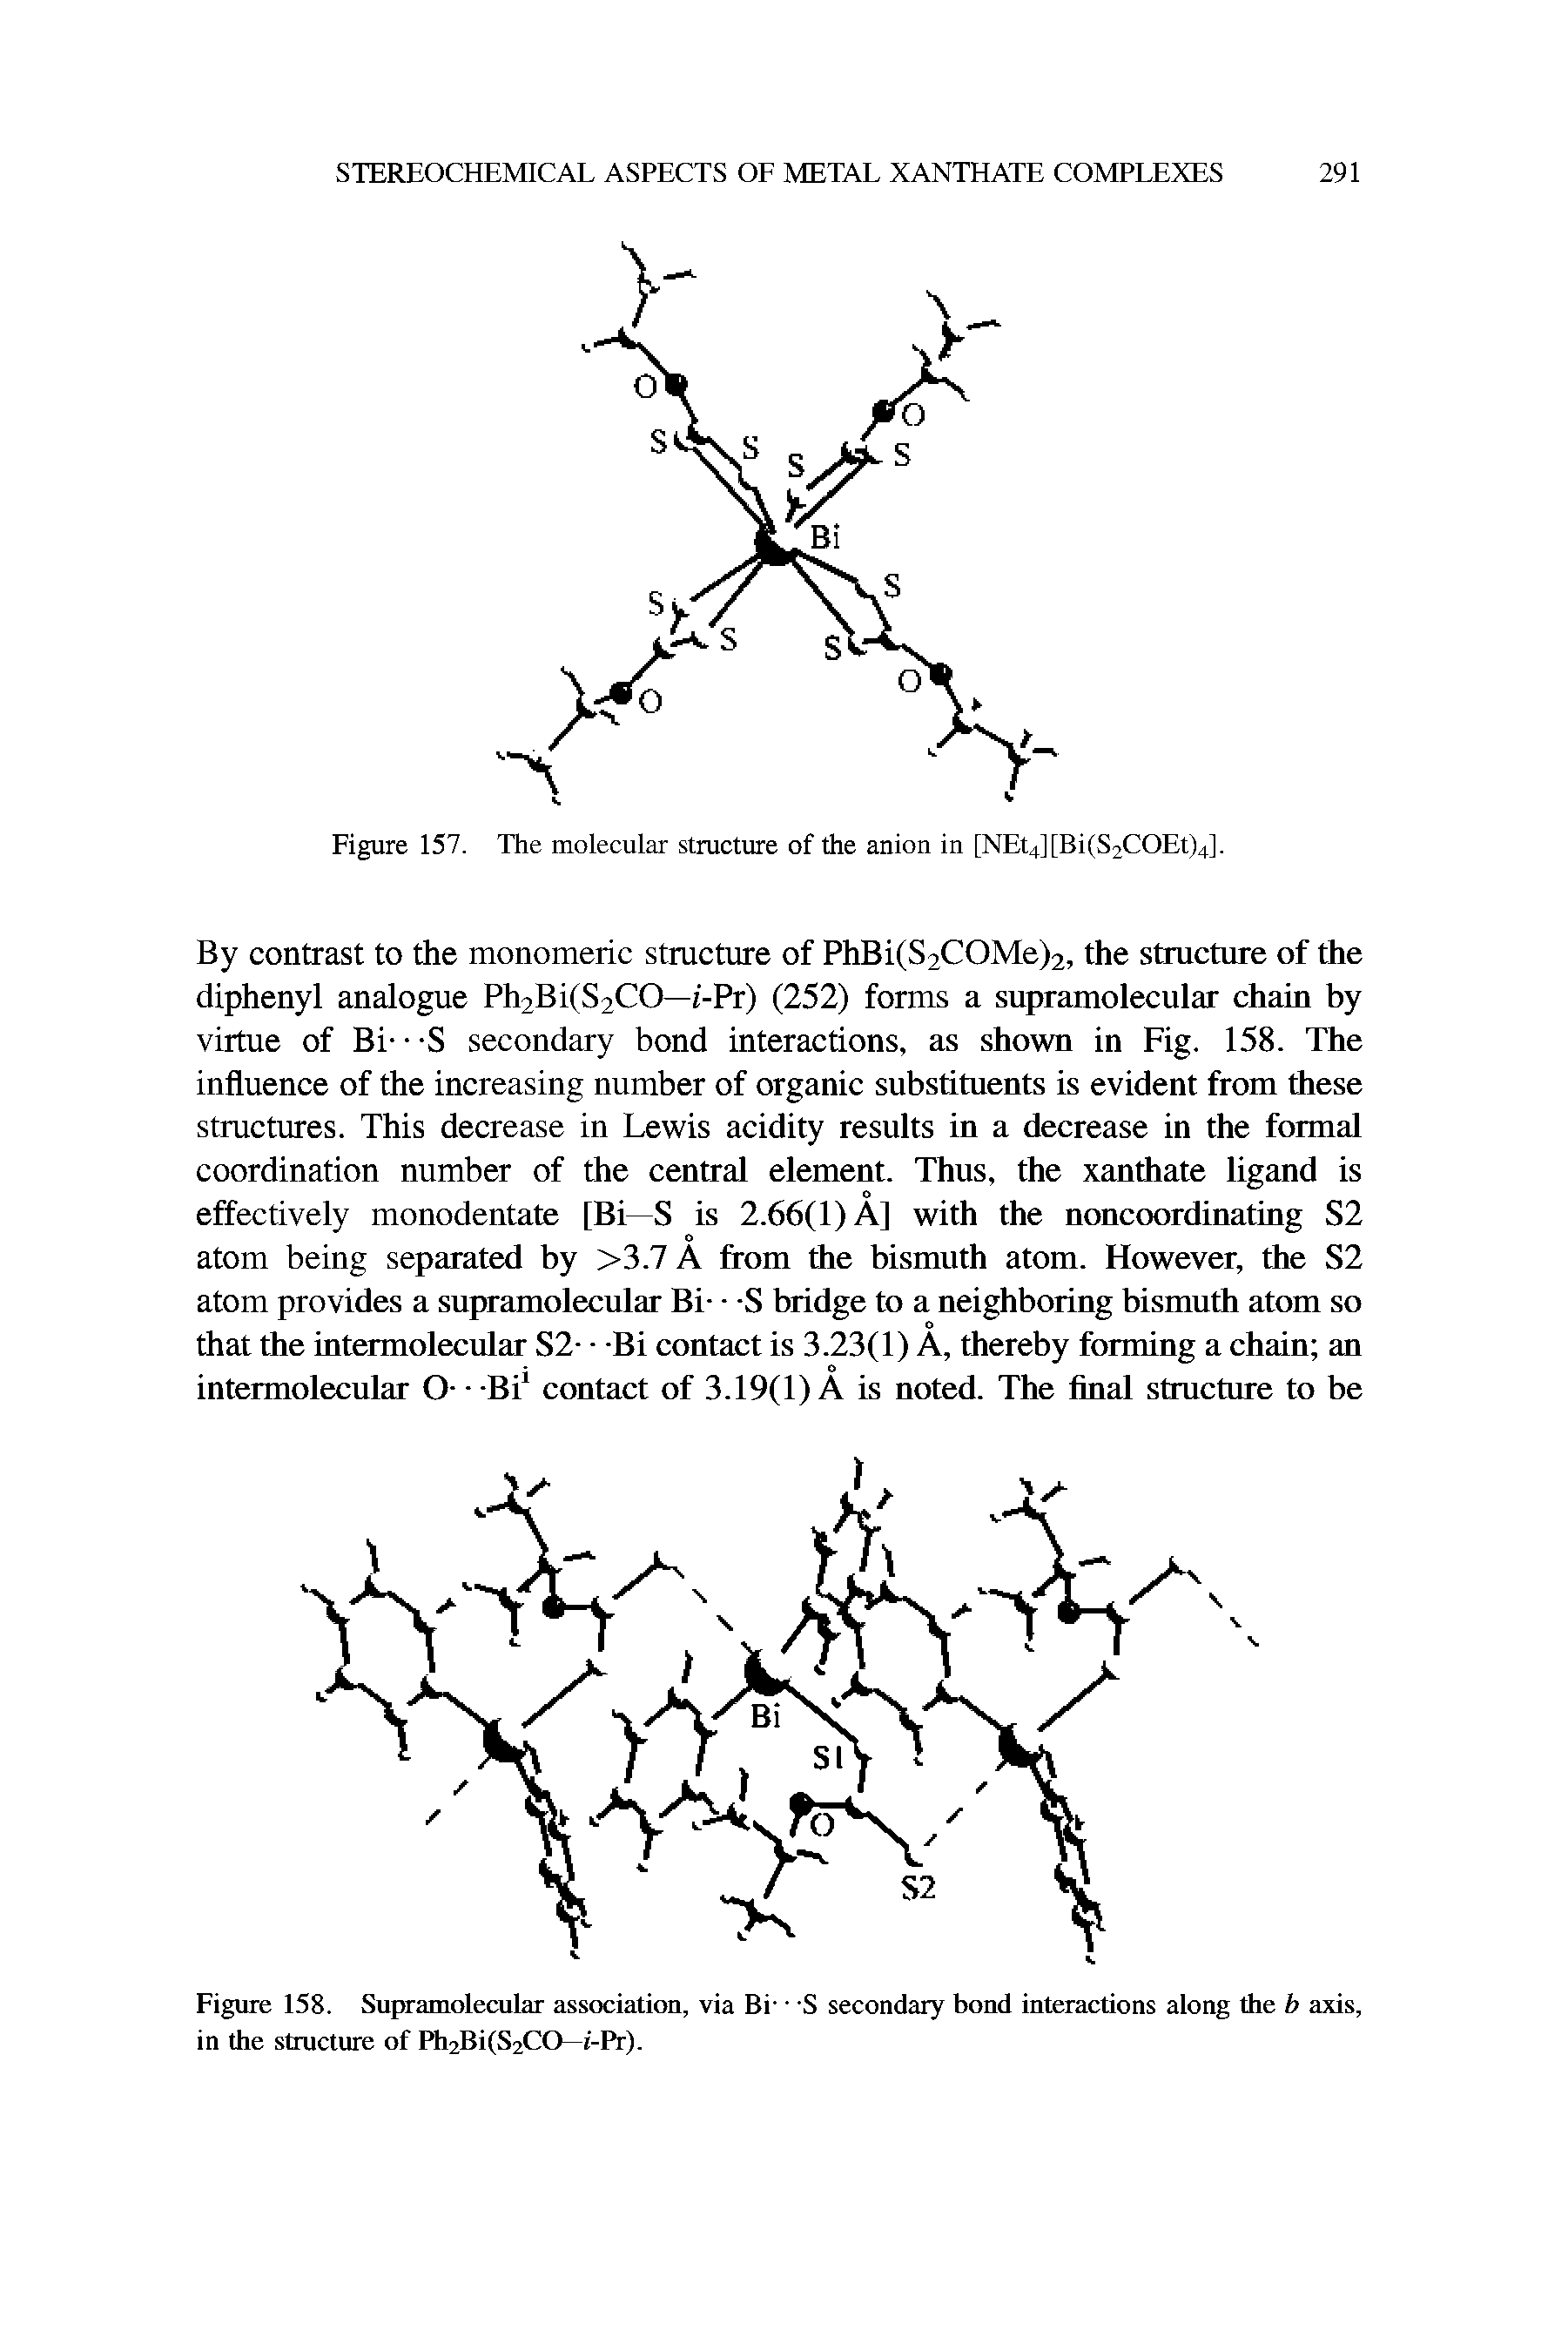 Figure 158. Supramolecular association, via Bi1 S secondary bond interactions along the b axis, in the structure of Ph2Bi(S2CO—r-Pr).